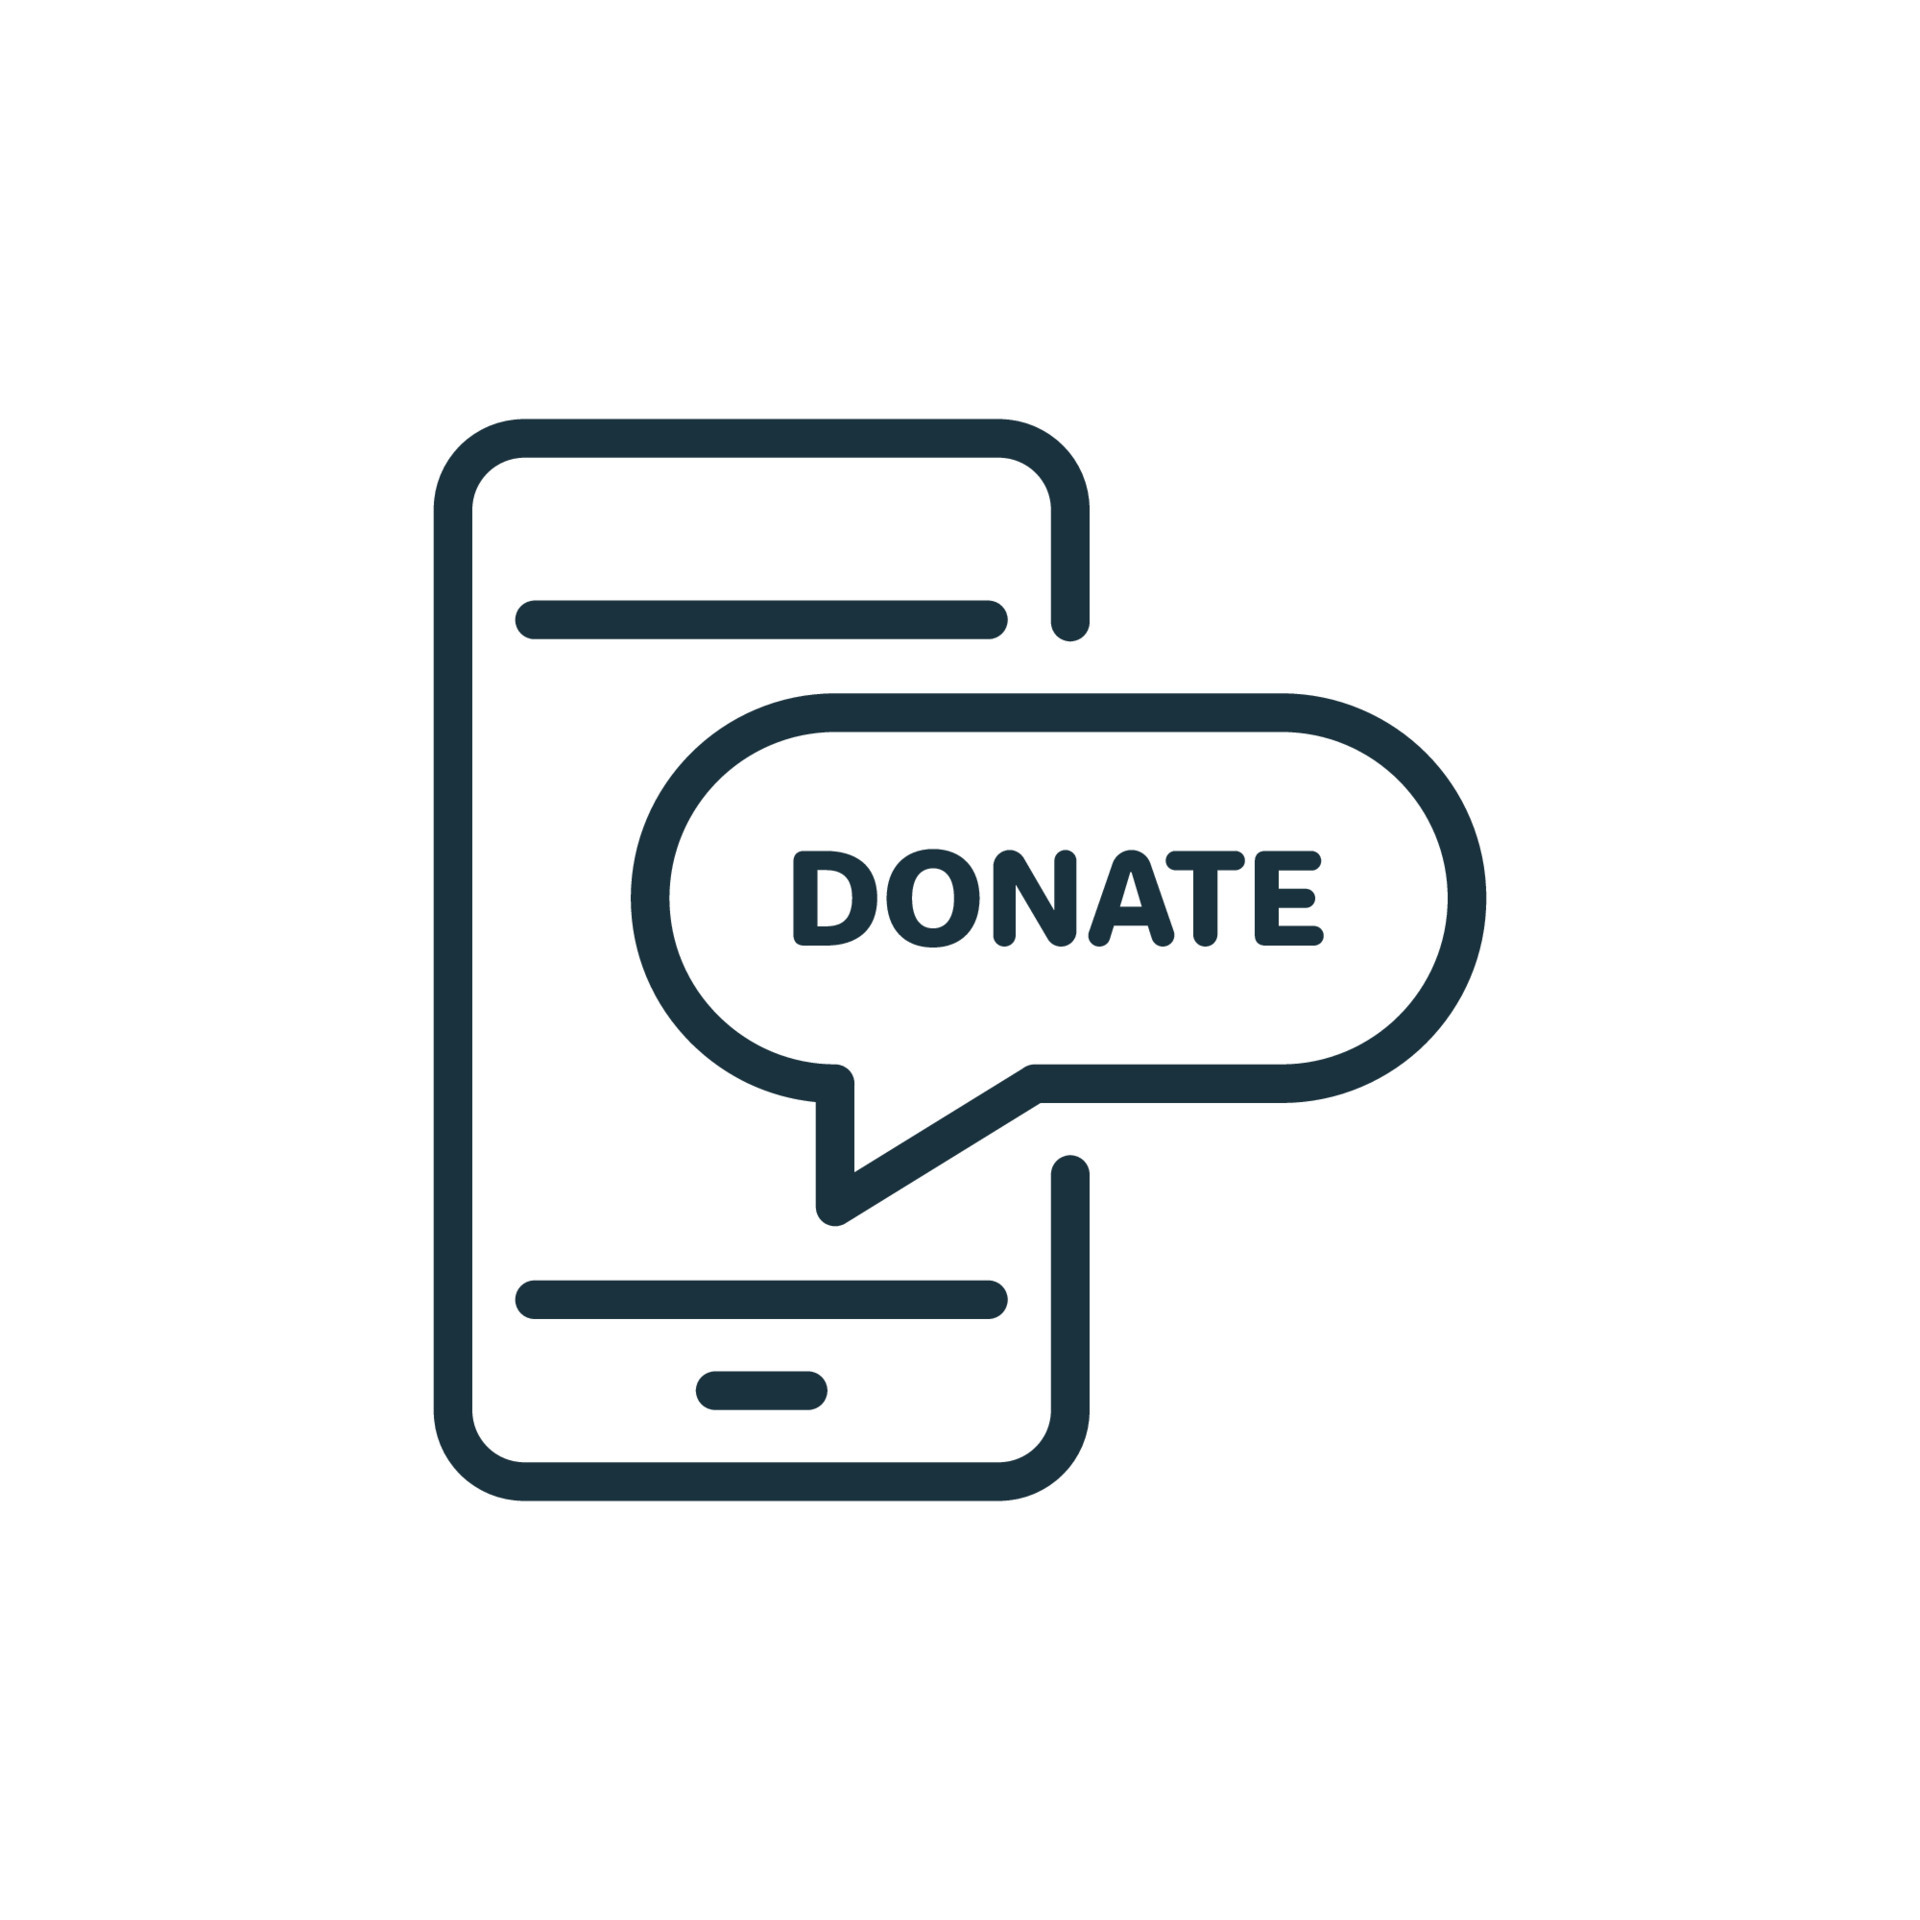 online-donate-on-phone-line-icon-web-mobile-giving-money-and-assistance-linear-pictogram-internet-donate-outline-icon-finance-help-concept-isolated-illustration-vector